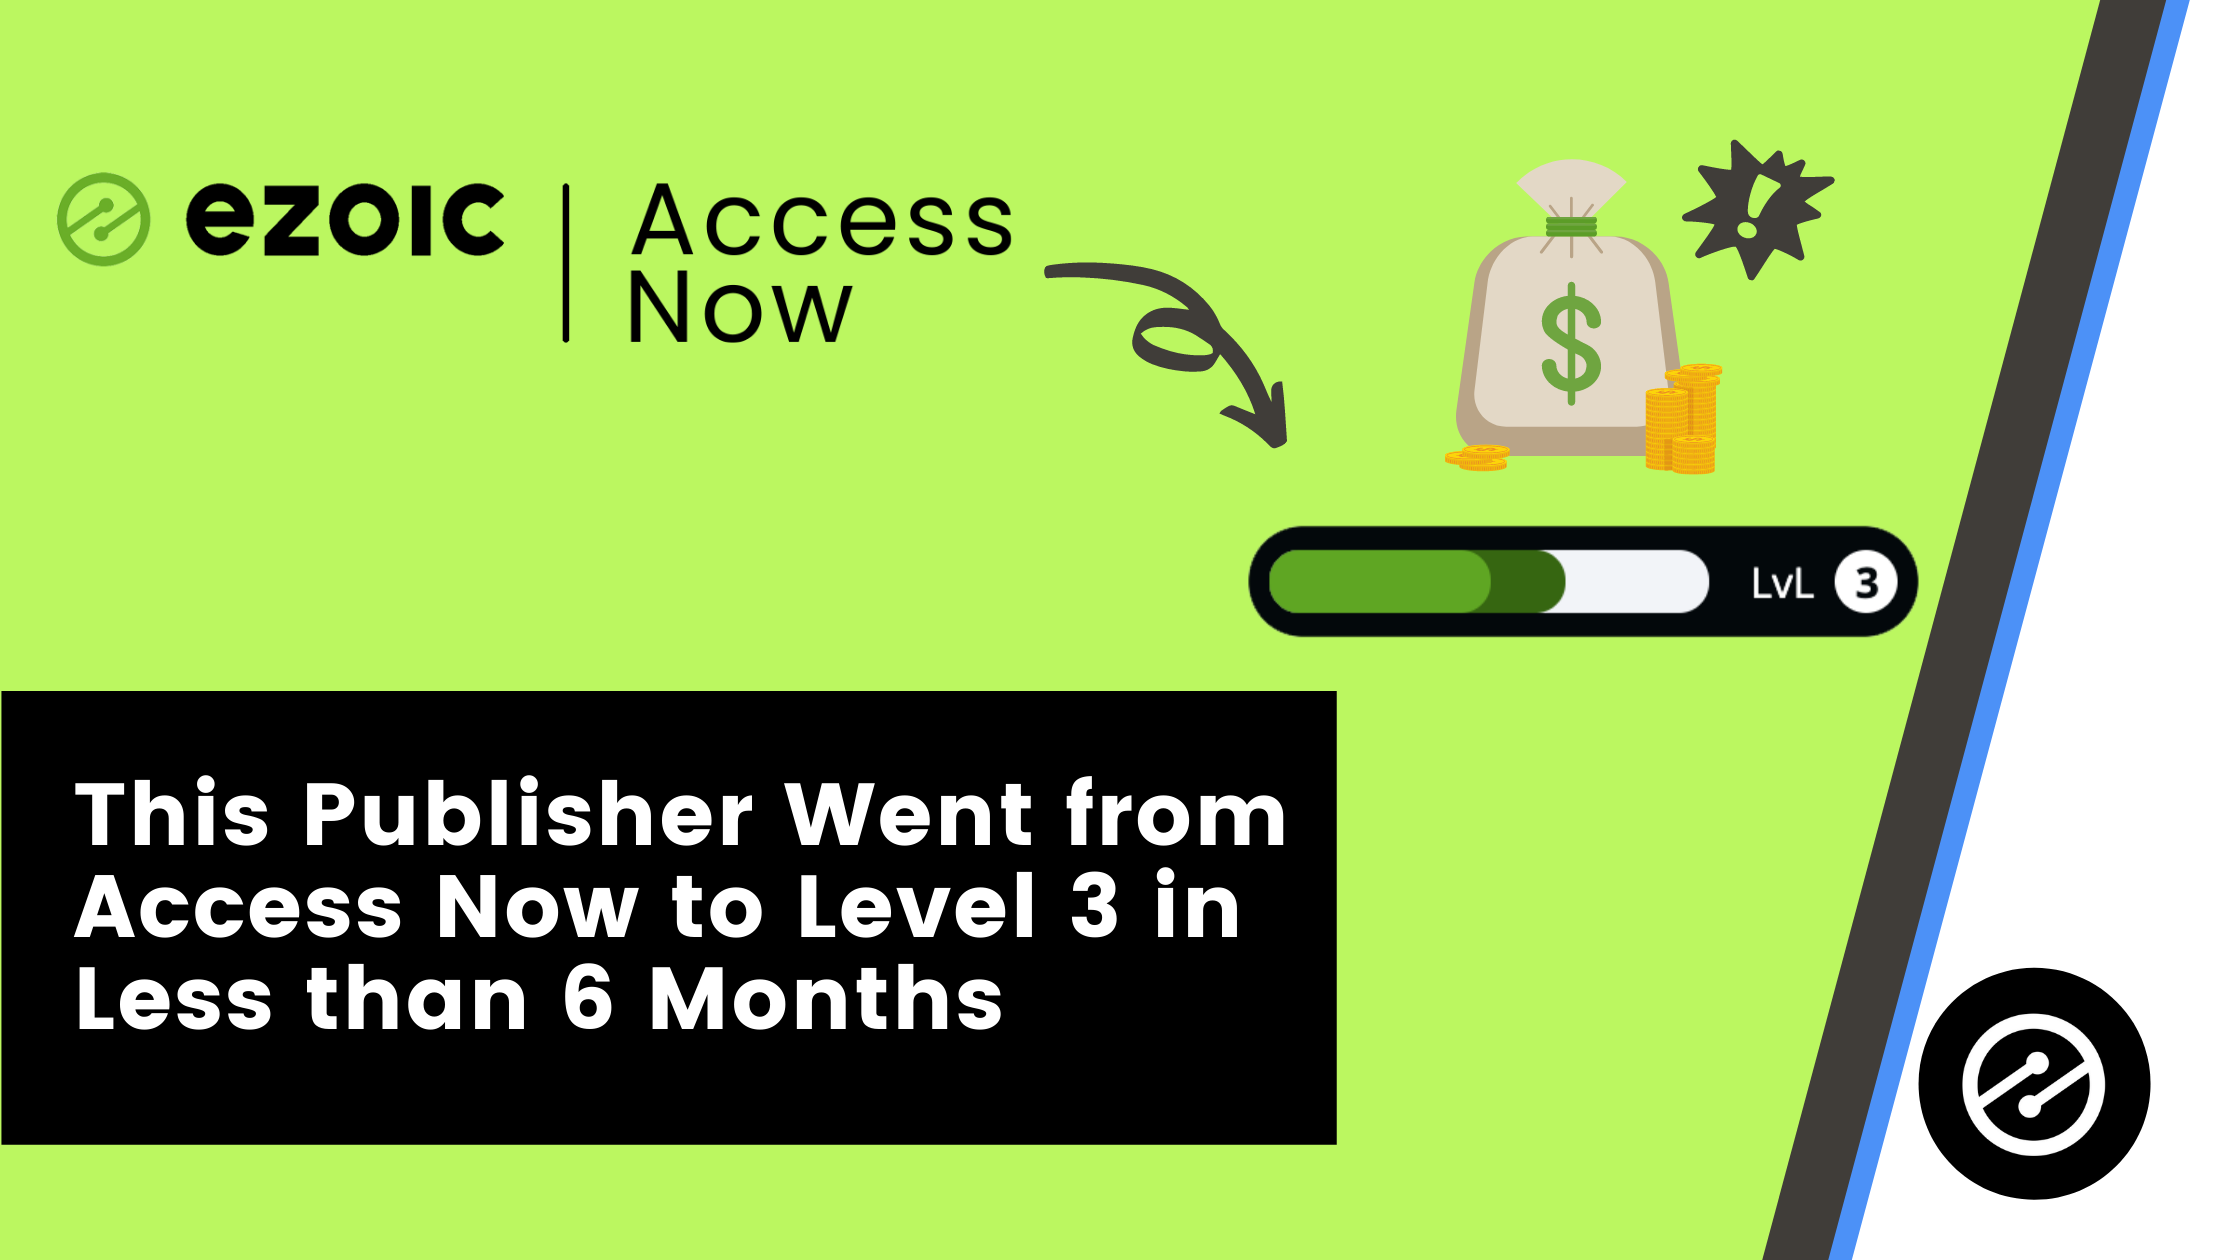 See How This Publisher Went from Access Now to Level 3 in Less than 6 Months